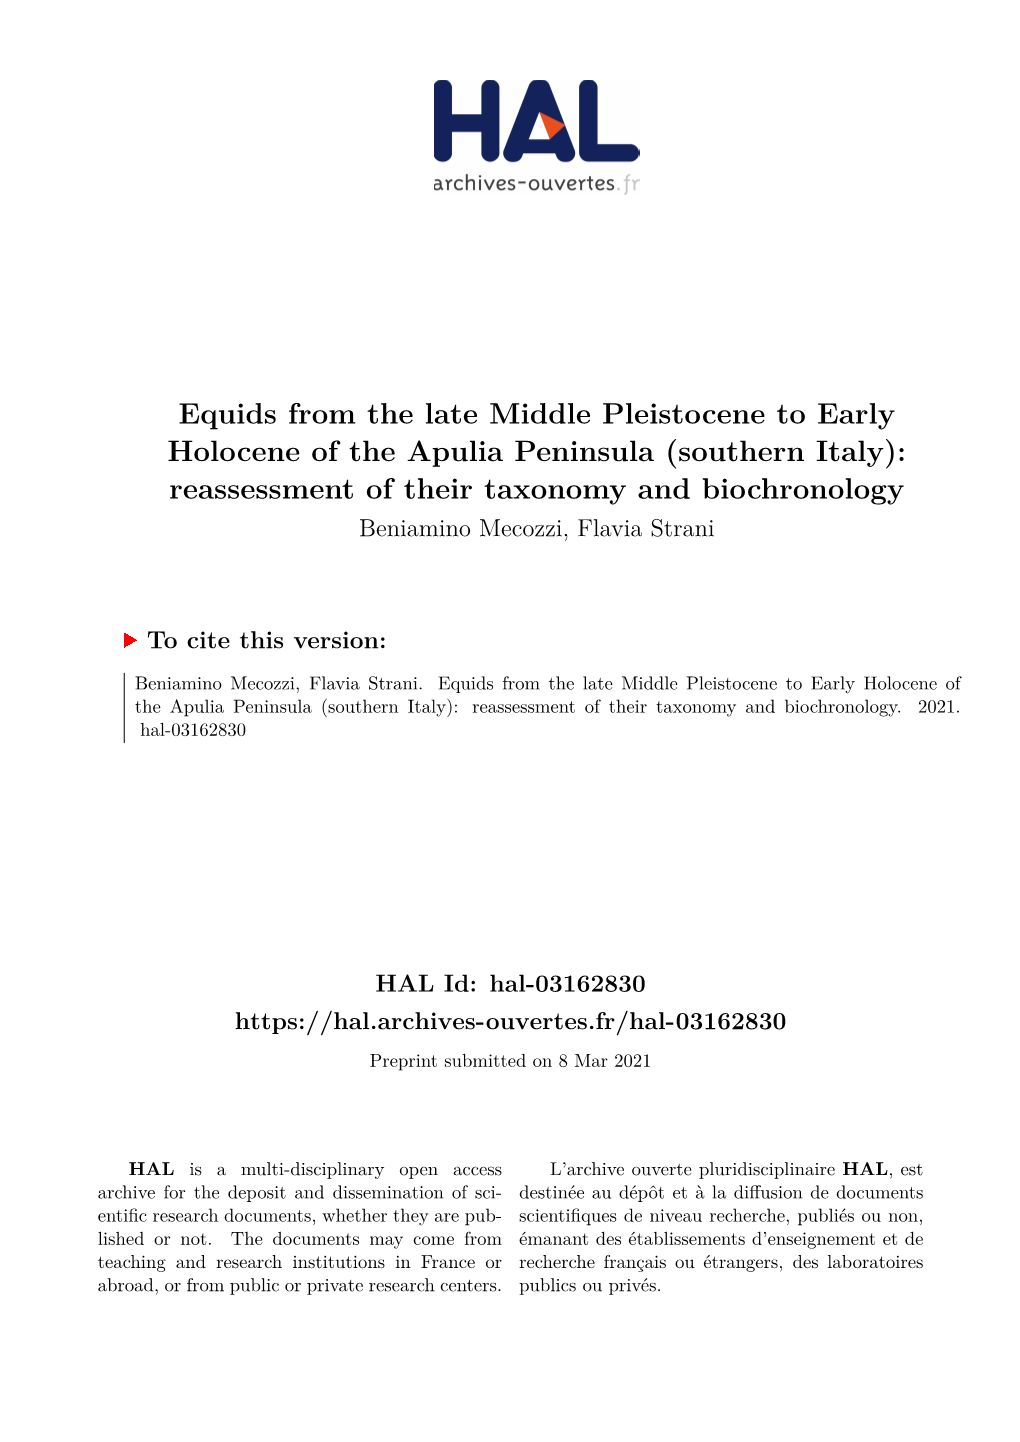 Equids from the Late Middle Pleistocene to Early Holocene Of